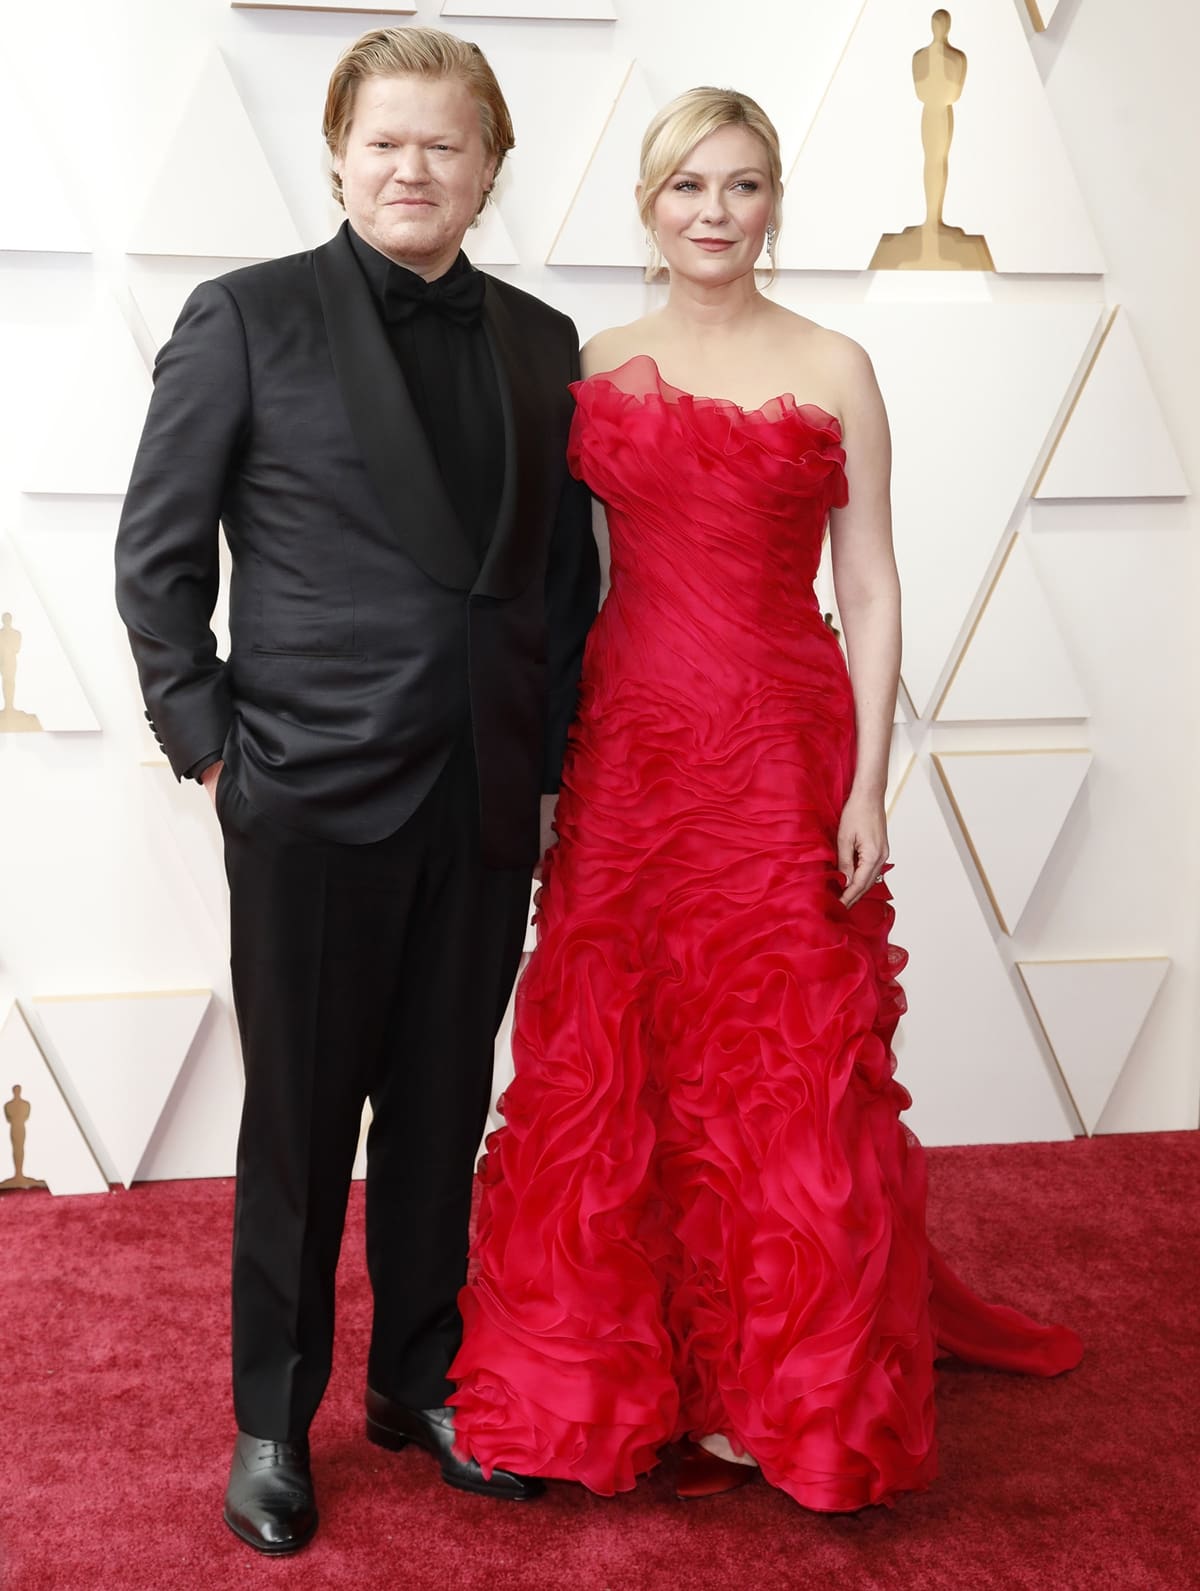 Kirsten Dunst in a red vintage Christian LaCroix dress from Lily et Cie with her husband Jesse Plemons at the 94th Annual Academy Awards